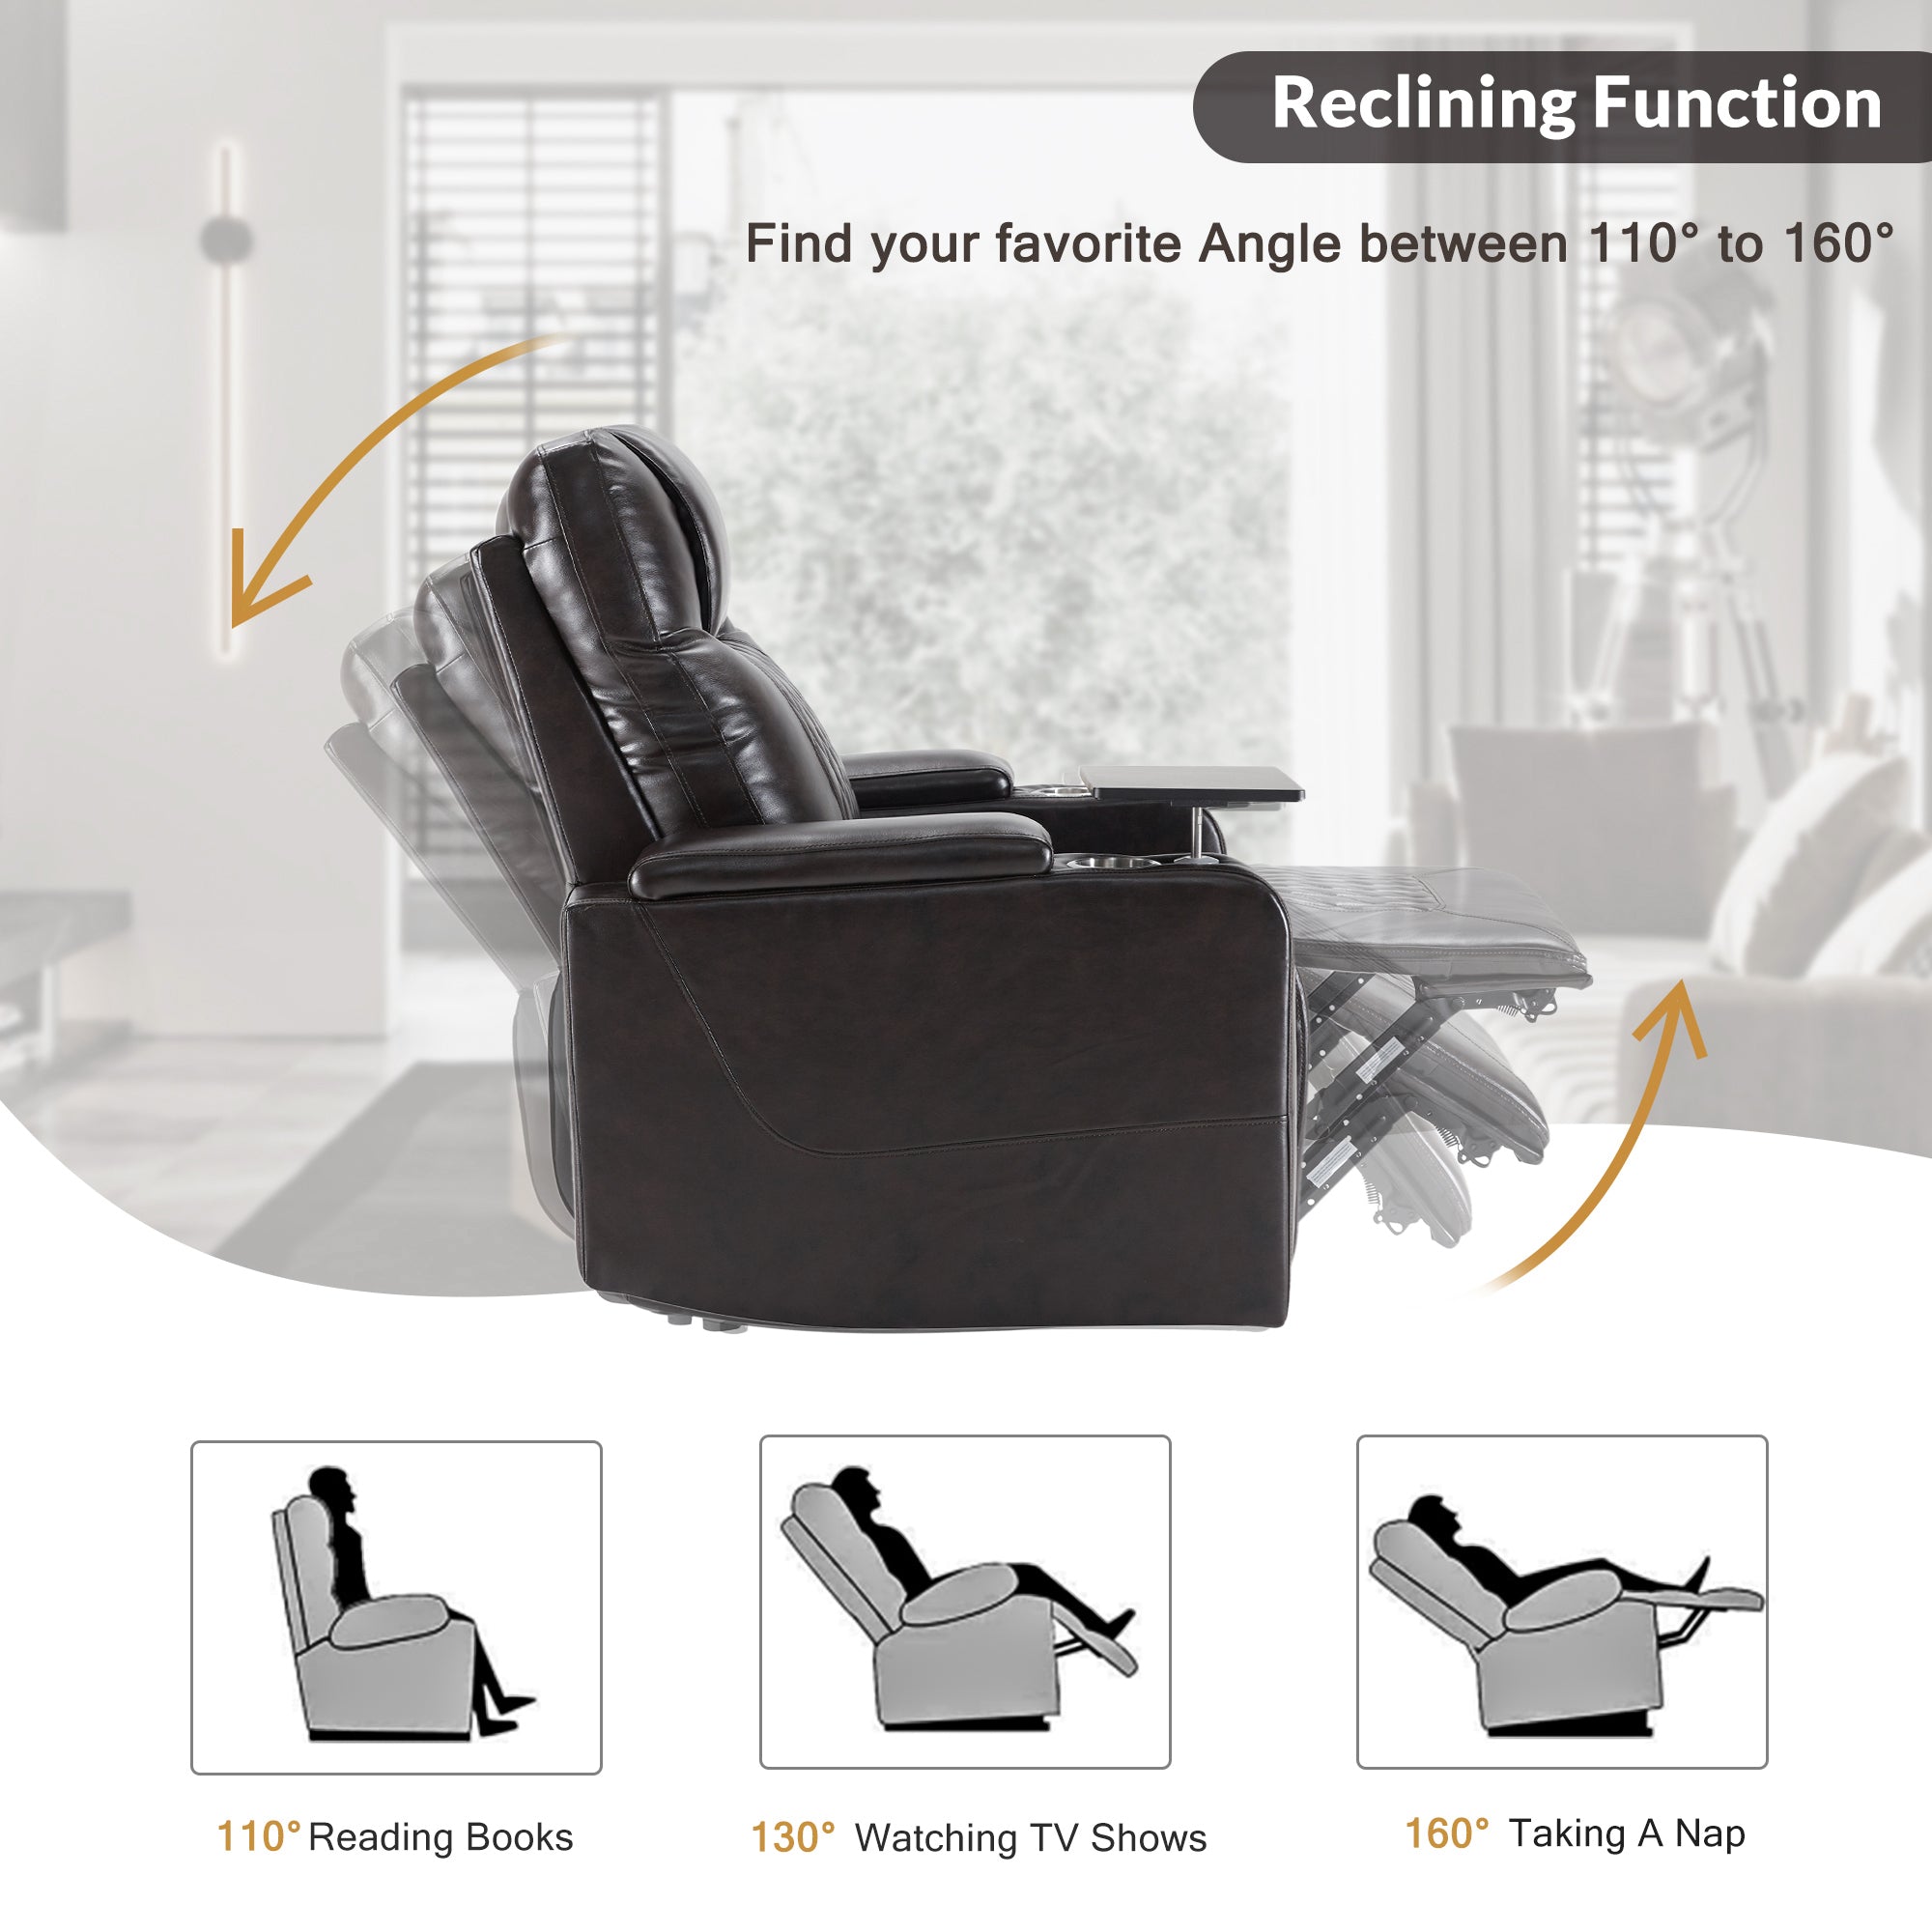 Oliver Power Motion Recliner with USB Charging Port and Hidden Arm Storage